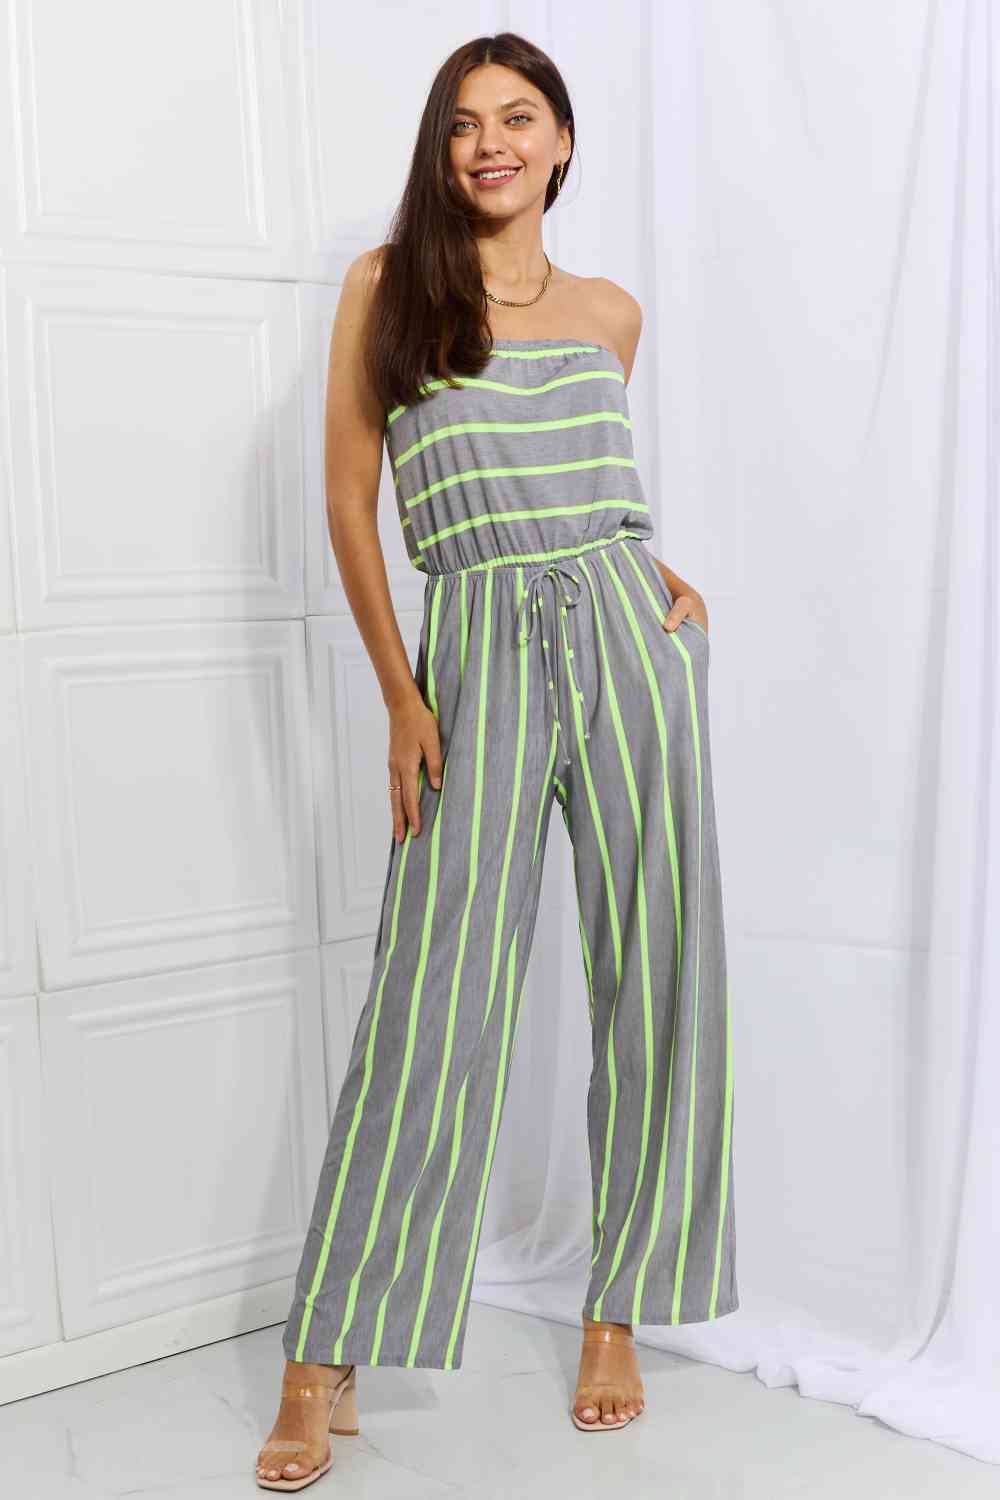 "Full-size sleeveless striped jumpsuit from Unique Kulture's Sew In Love collection. Vibrant and stylish, this jumpsuit features a pop of color, making it a trendy and eye-catching fashion choice."